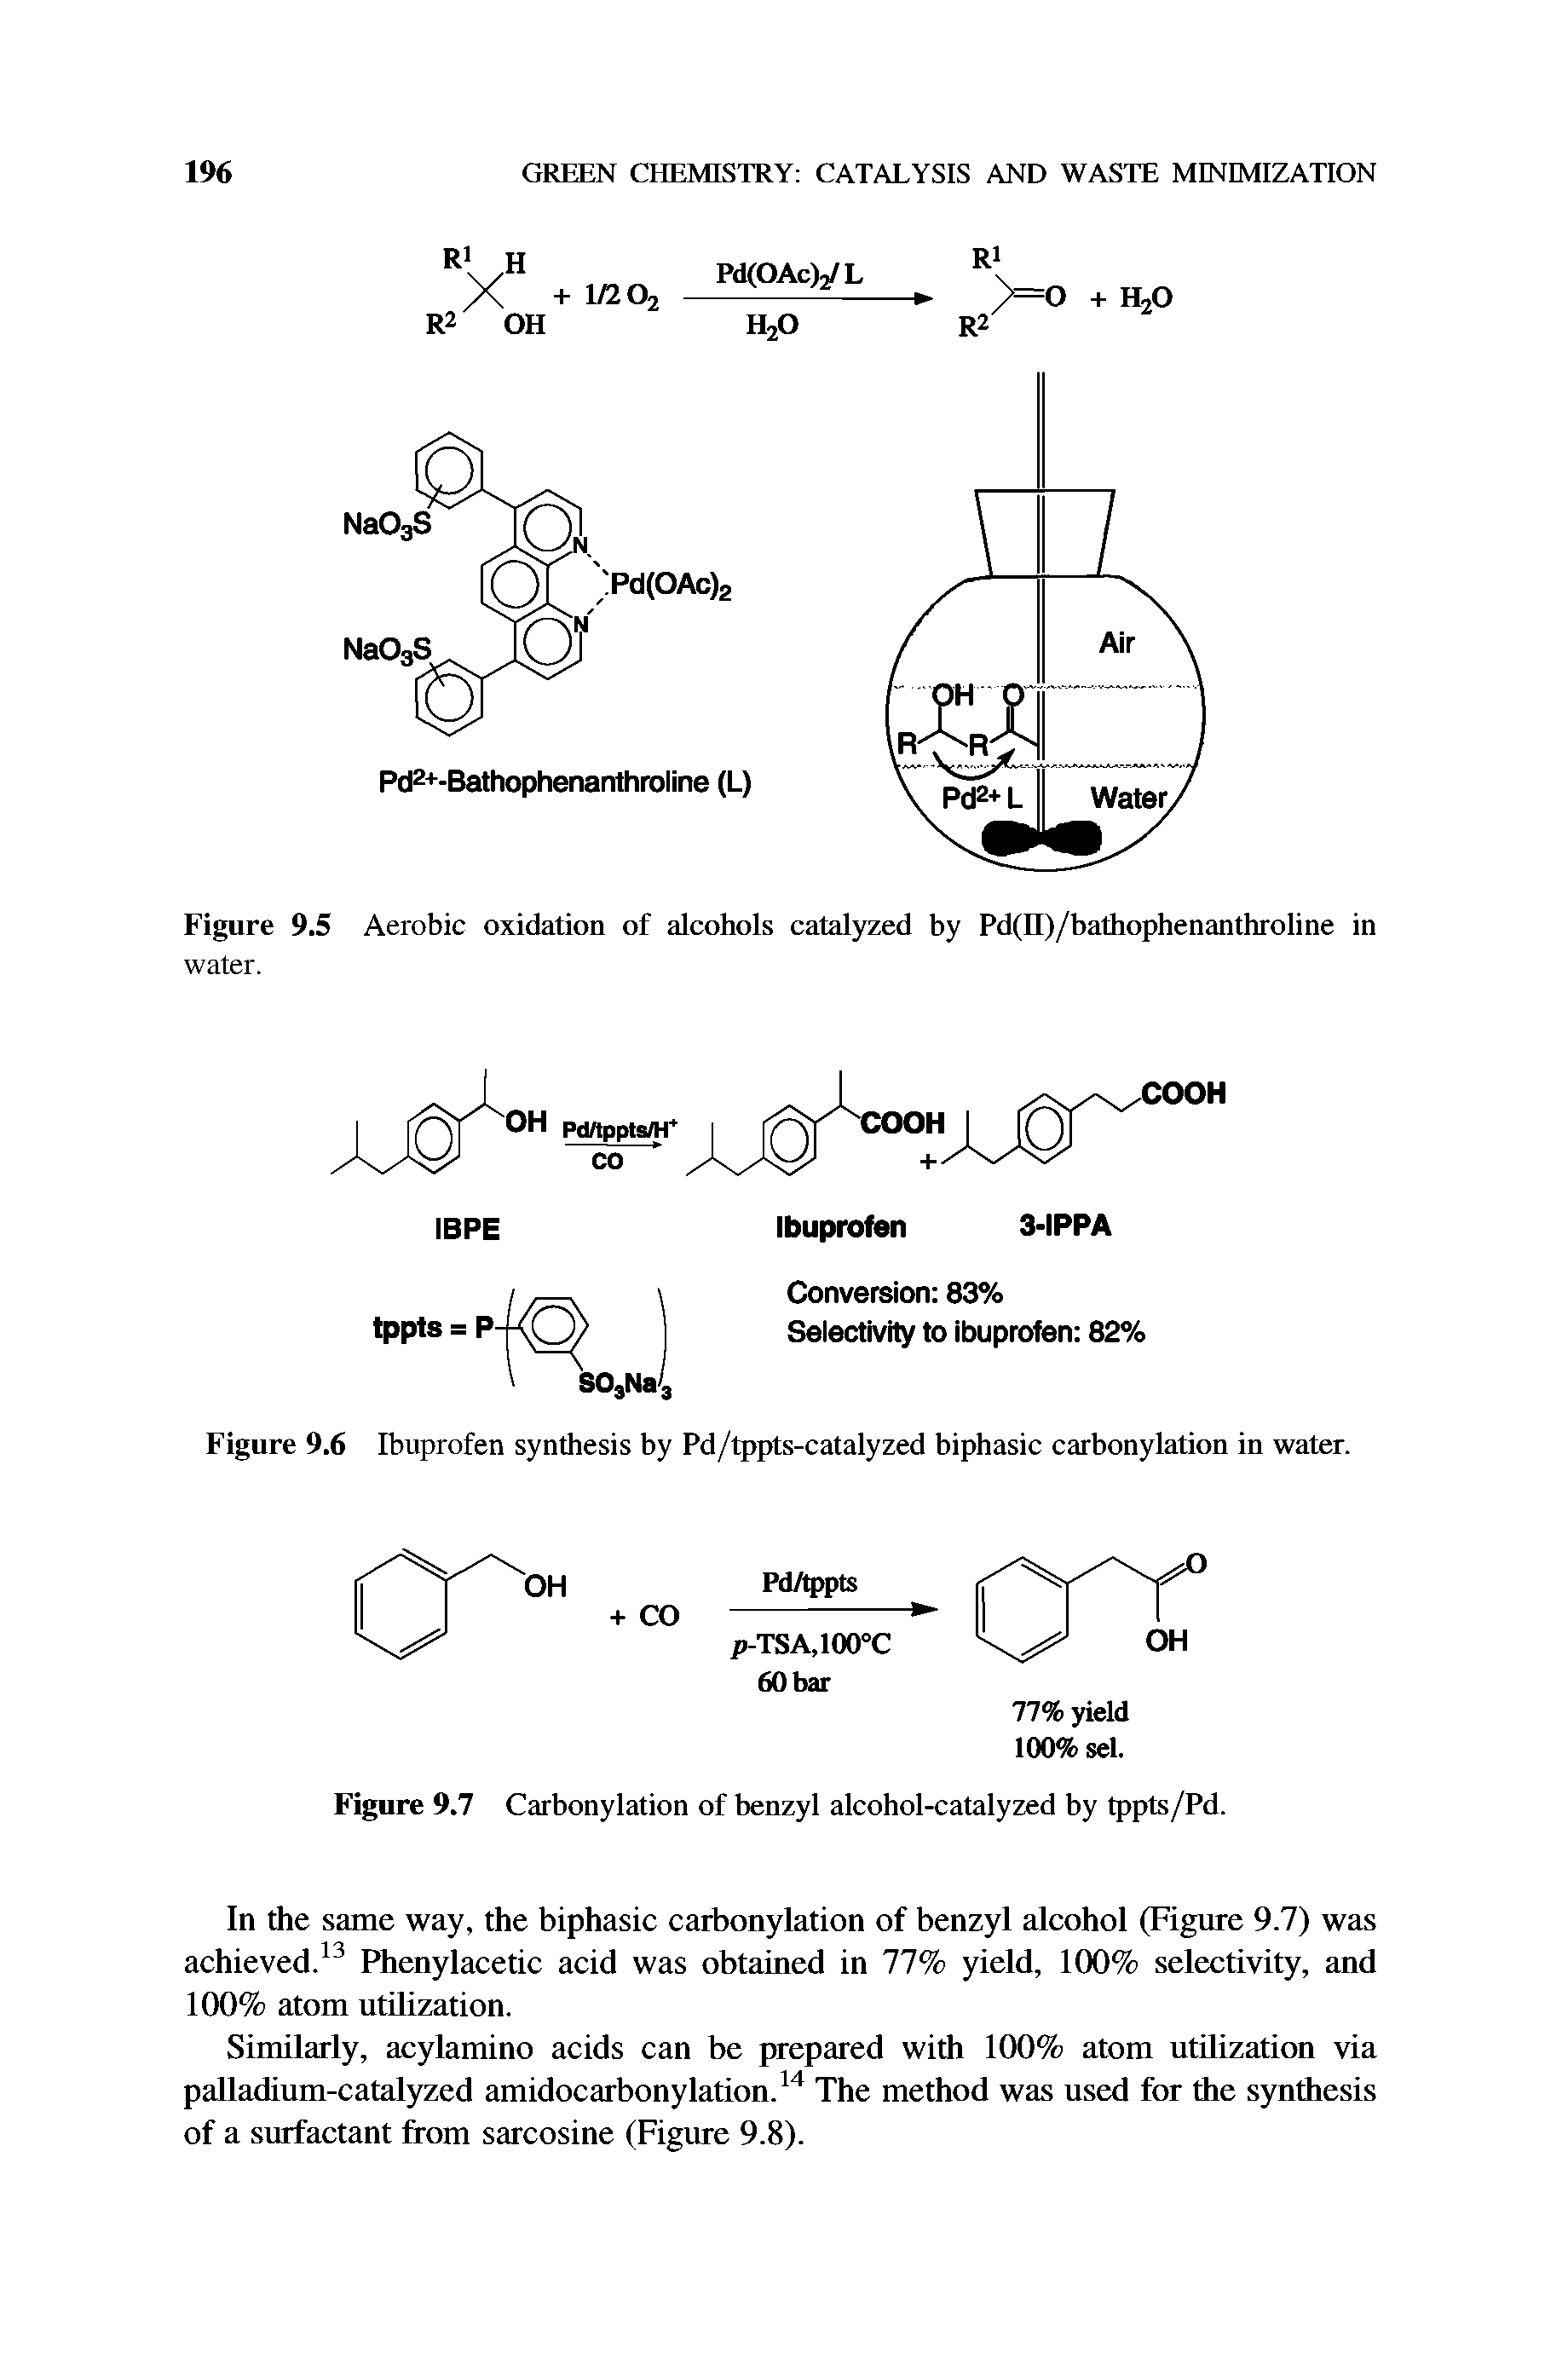 Figure 9.6 Ibuprofen synthesis by Pd/tppts-catalyzed biphasic carbonylation in water.